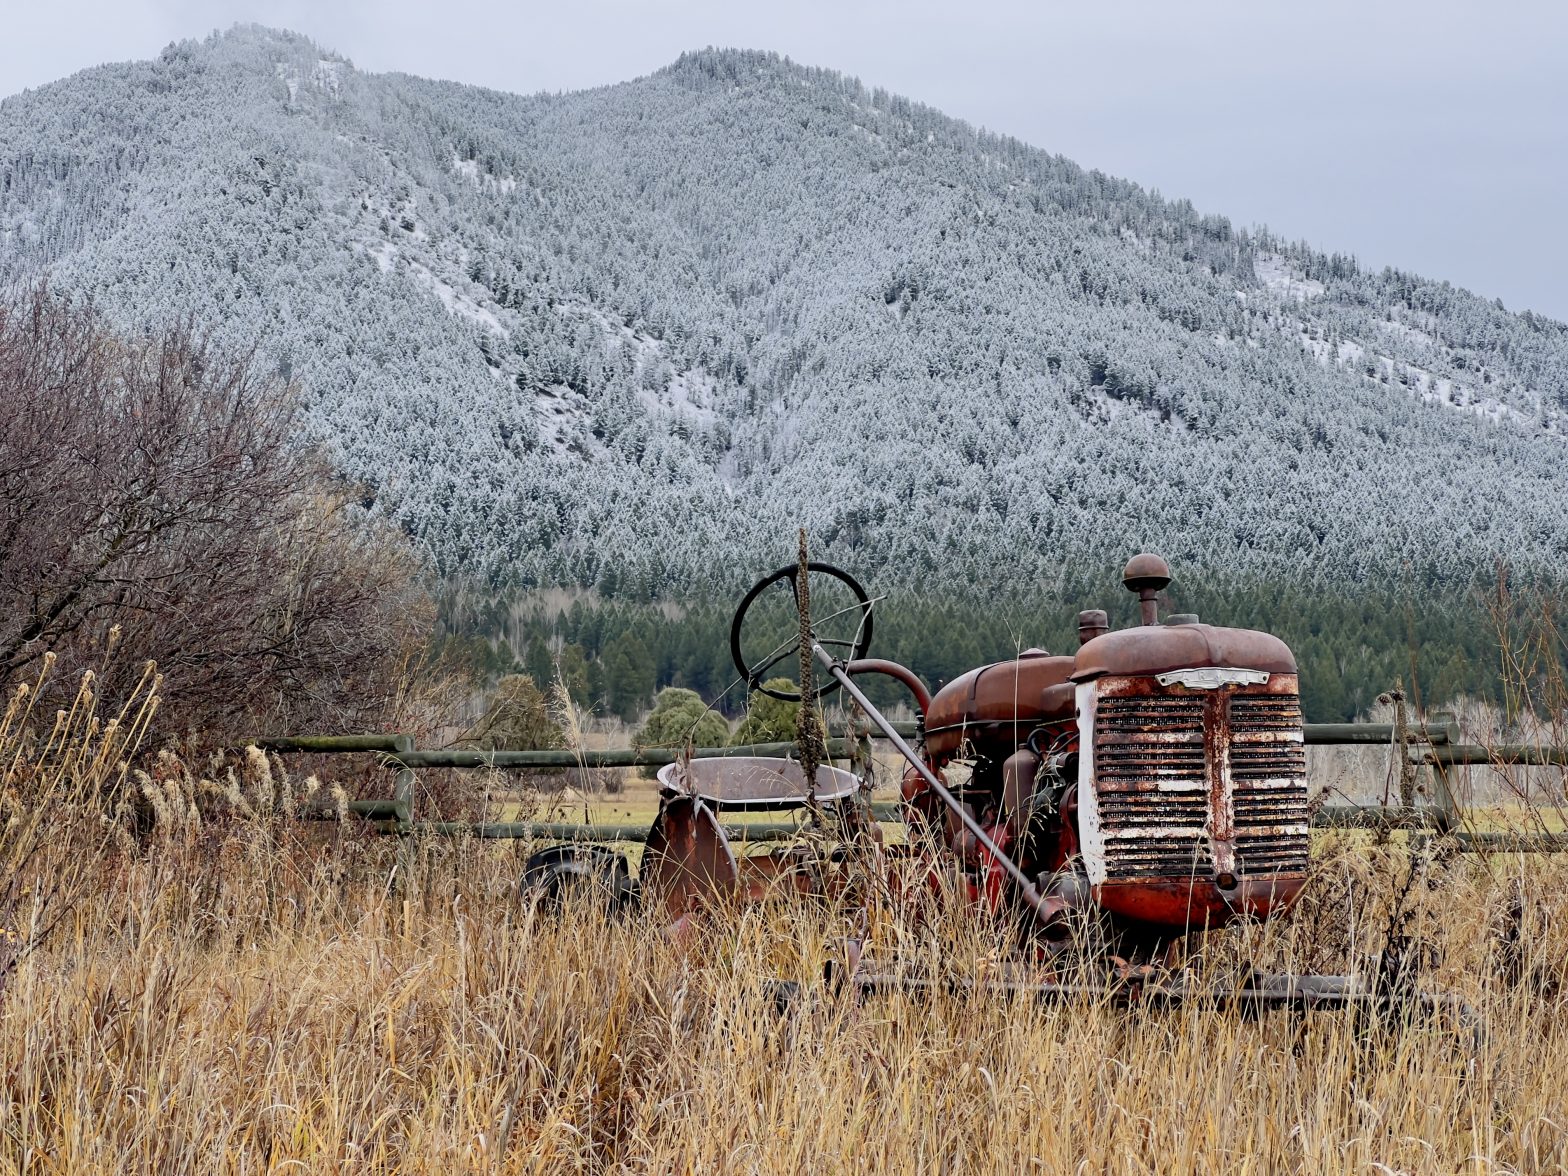 Farmall Model A with snow-capped mountains